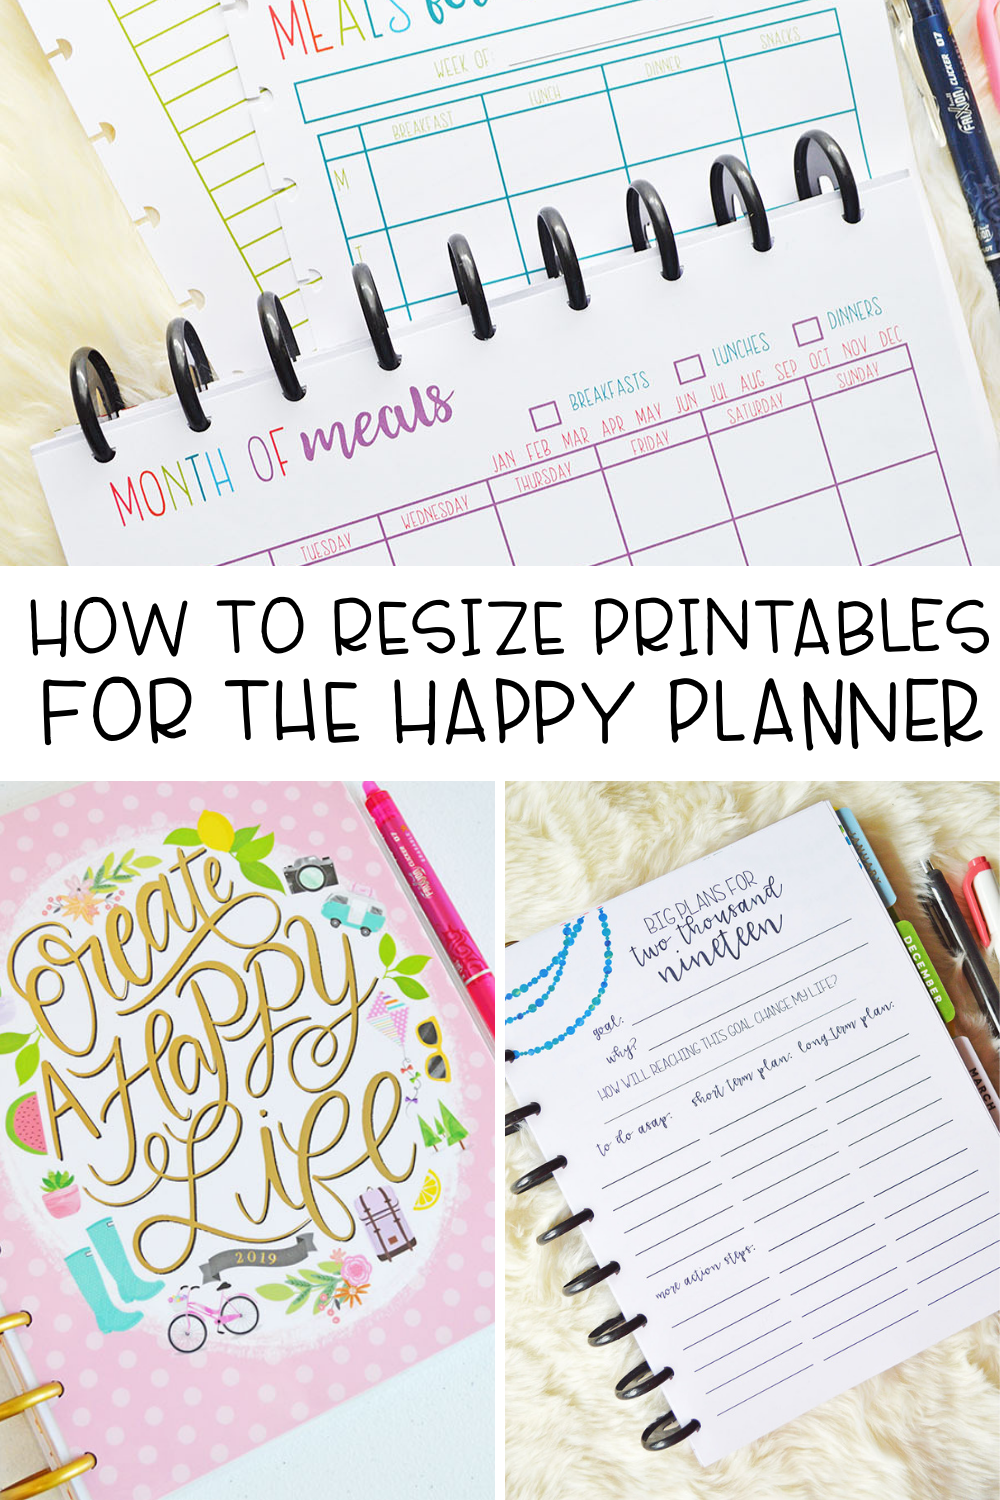 How to Resize Printables for your Happy Planner -   15 fitness Planner buy ideas